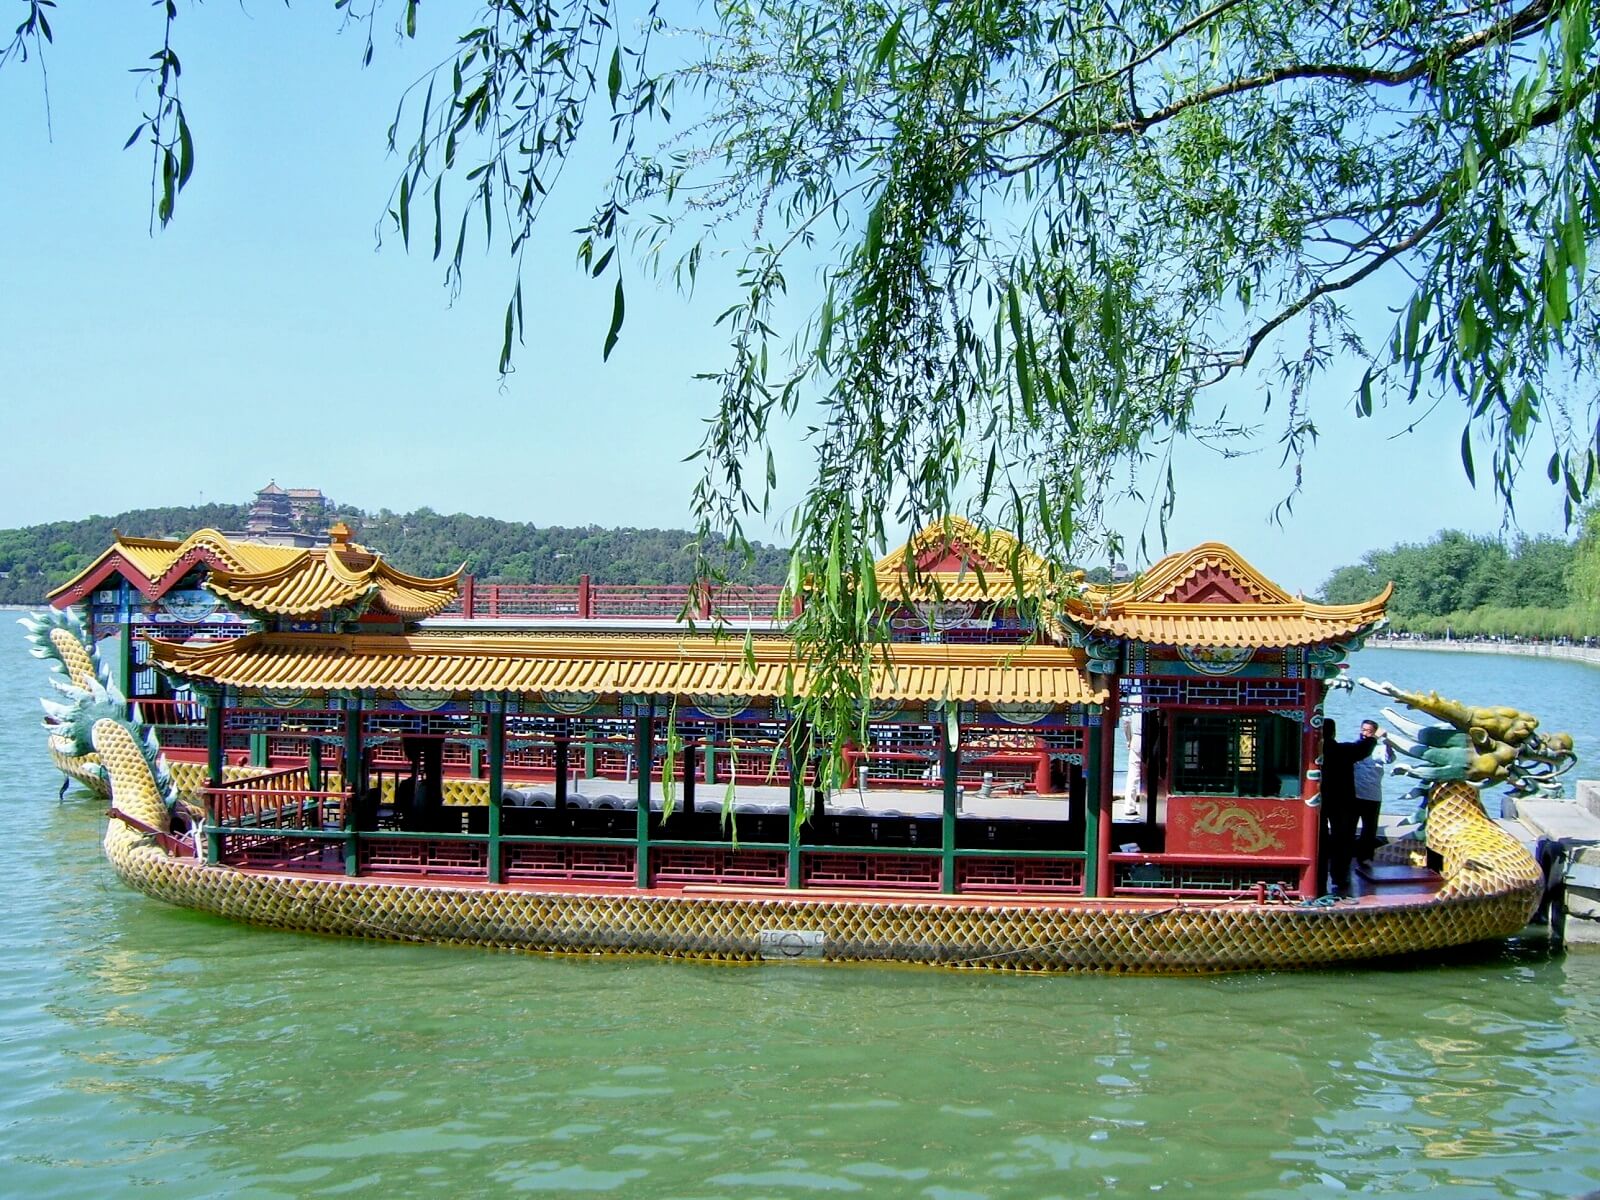 Boating on the dragon boat, Beijing